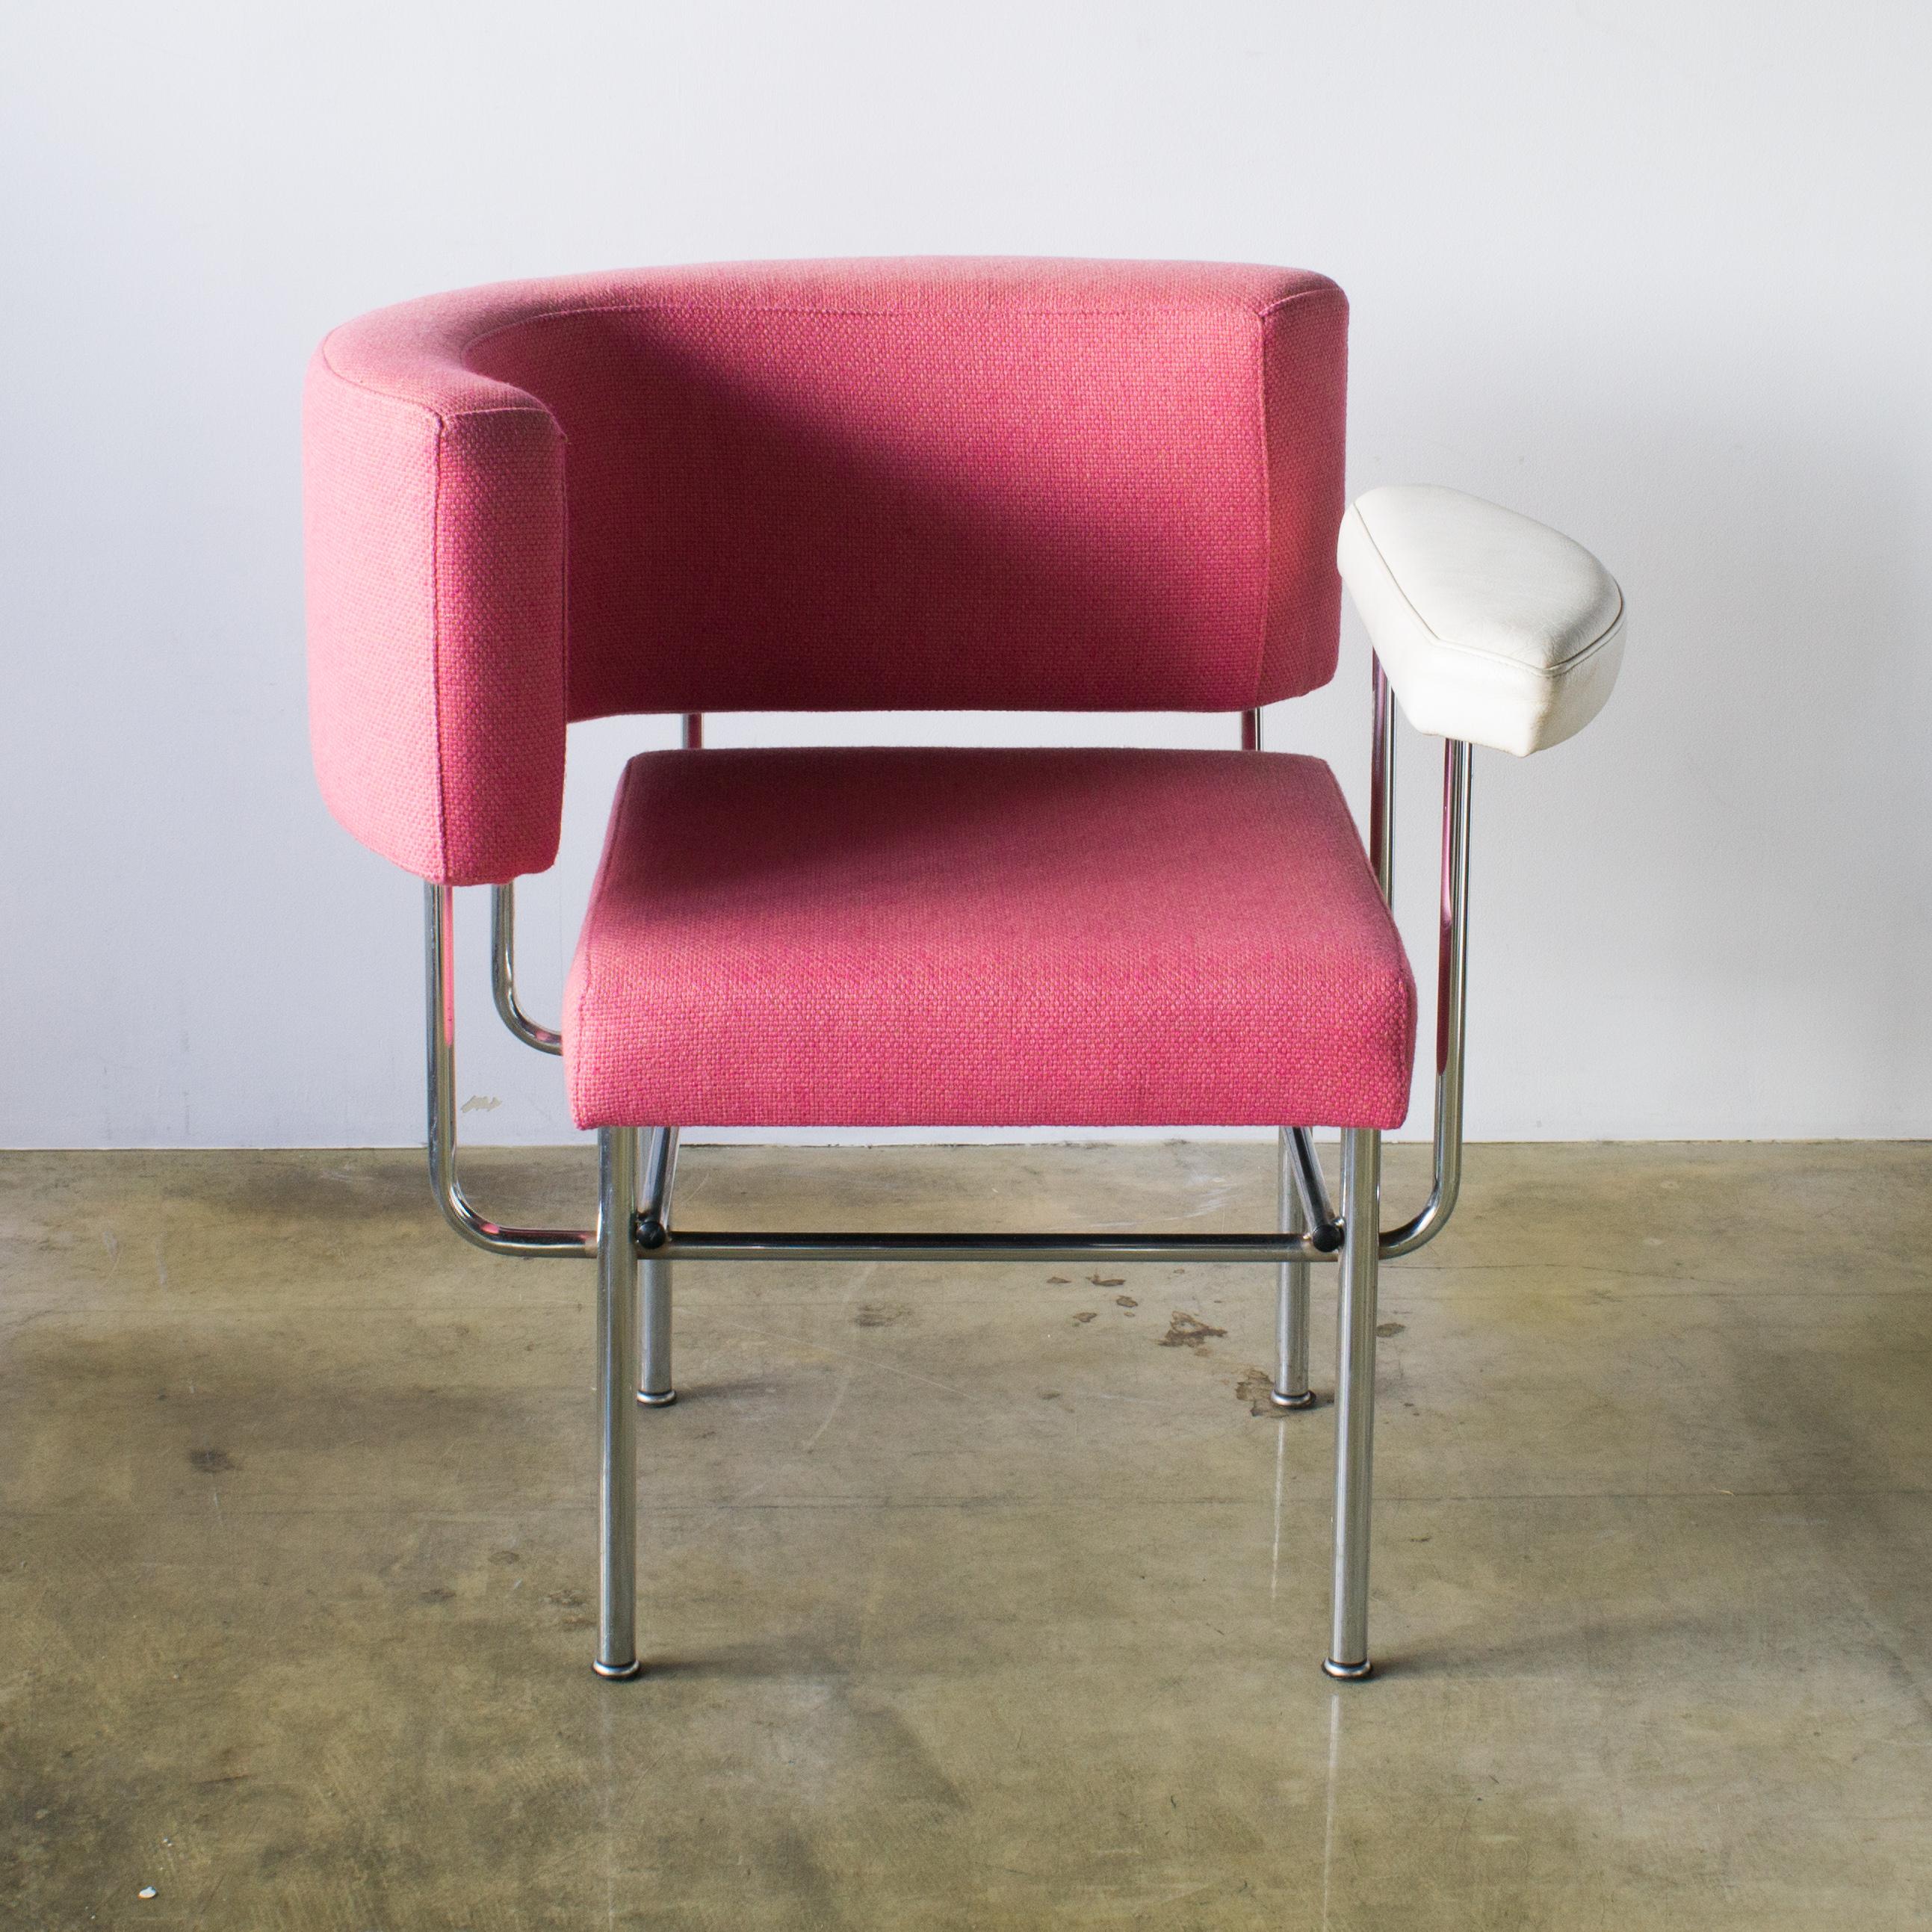 Cotton club lounge chair designed by Carlo Forcolini. Pink wool fabric and white leather upholstered.